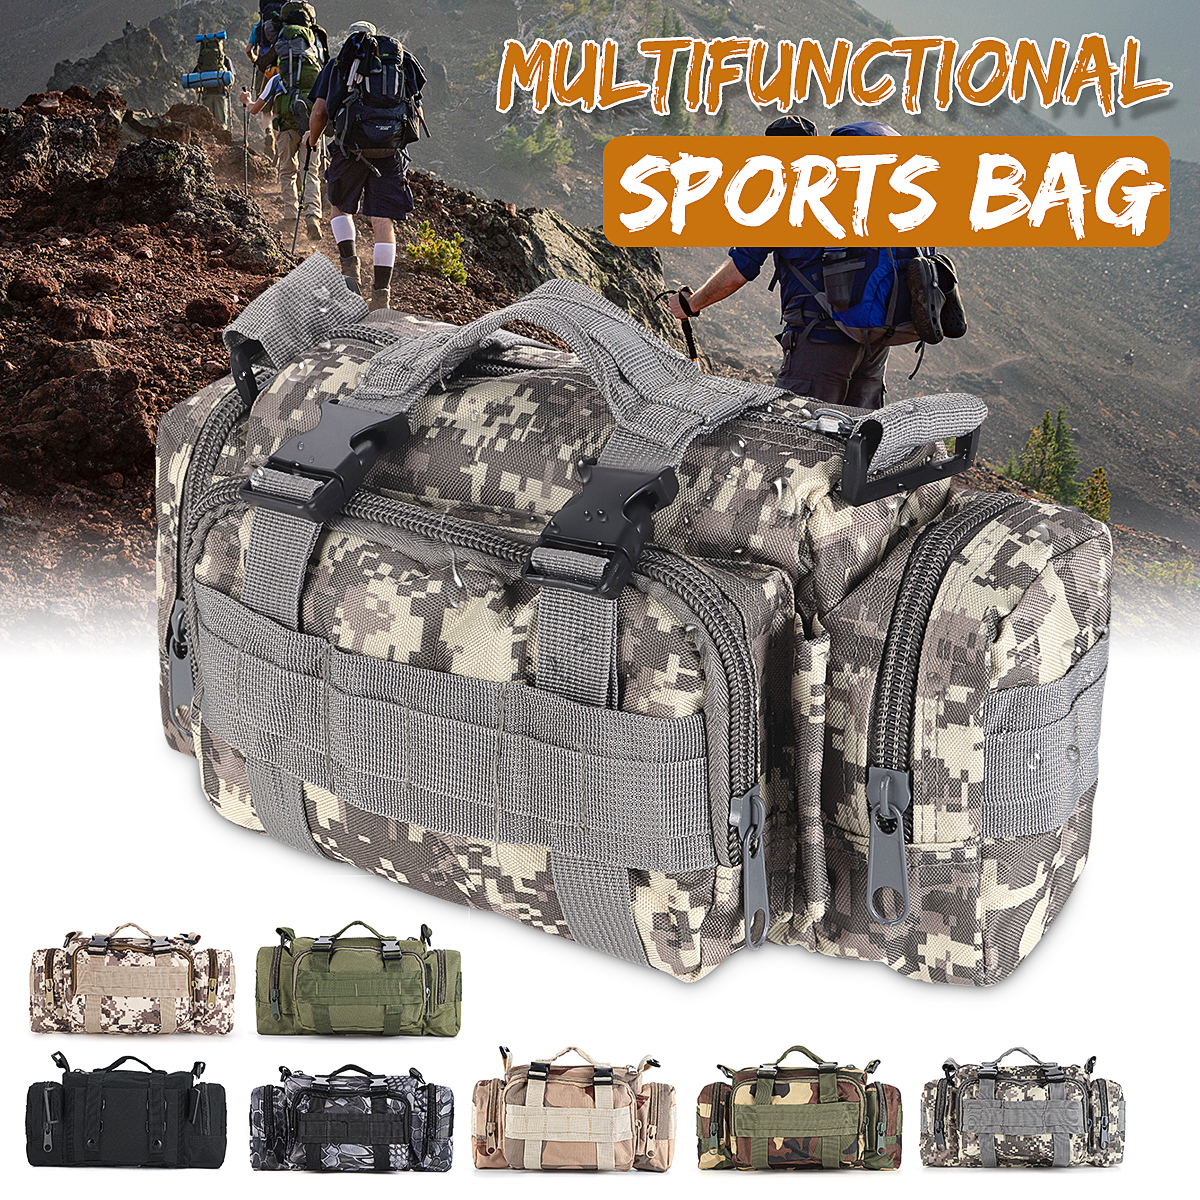 Multifunctional-Outdoor-Sports-Hiking-with-Zippers-Nylon-Oxford-Cloth-Tactical-Shoulder-Bag-Waist-Pa-1825563-1